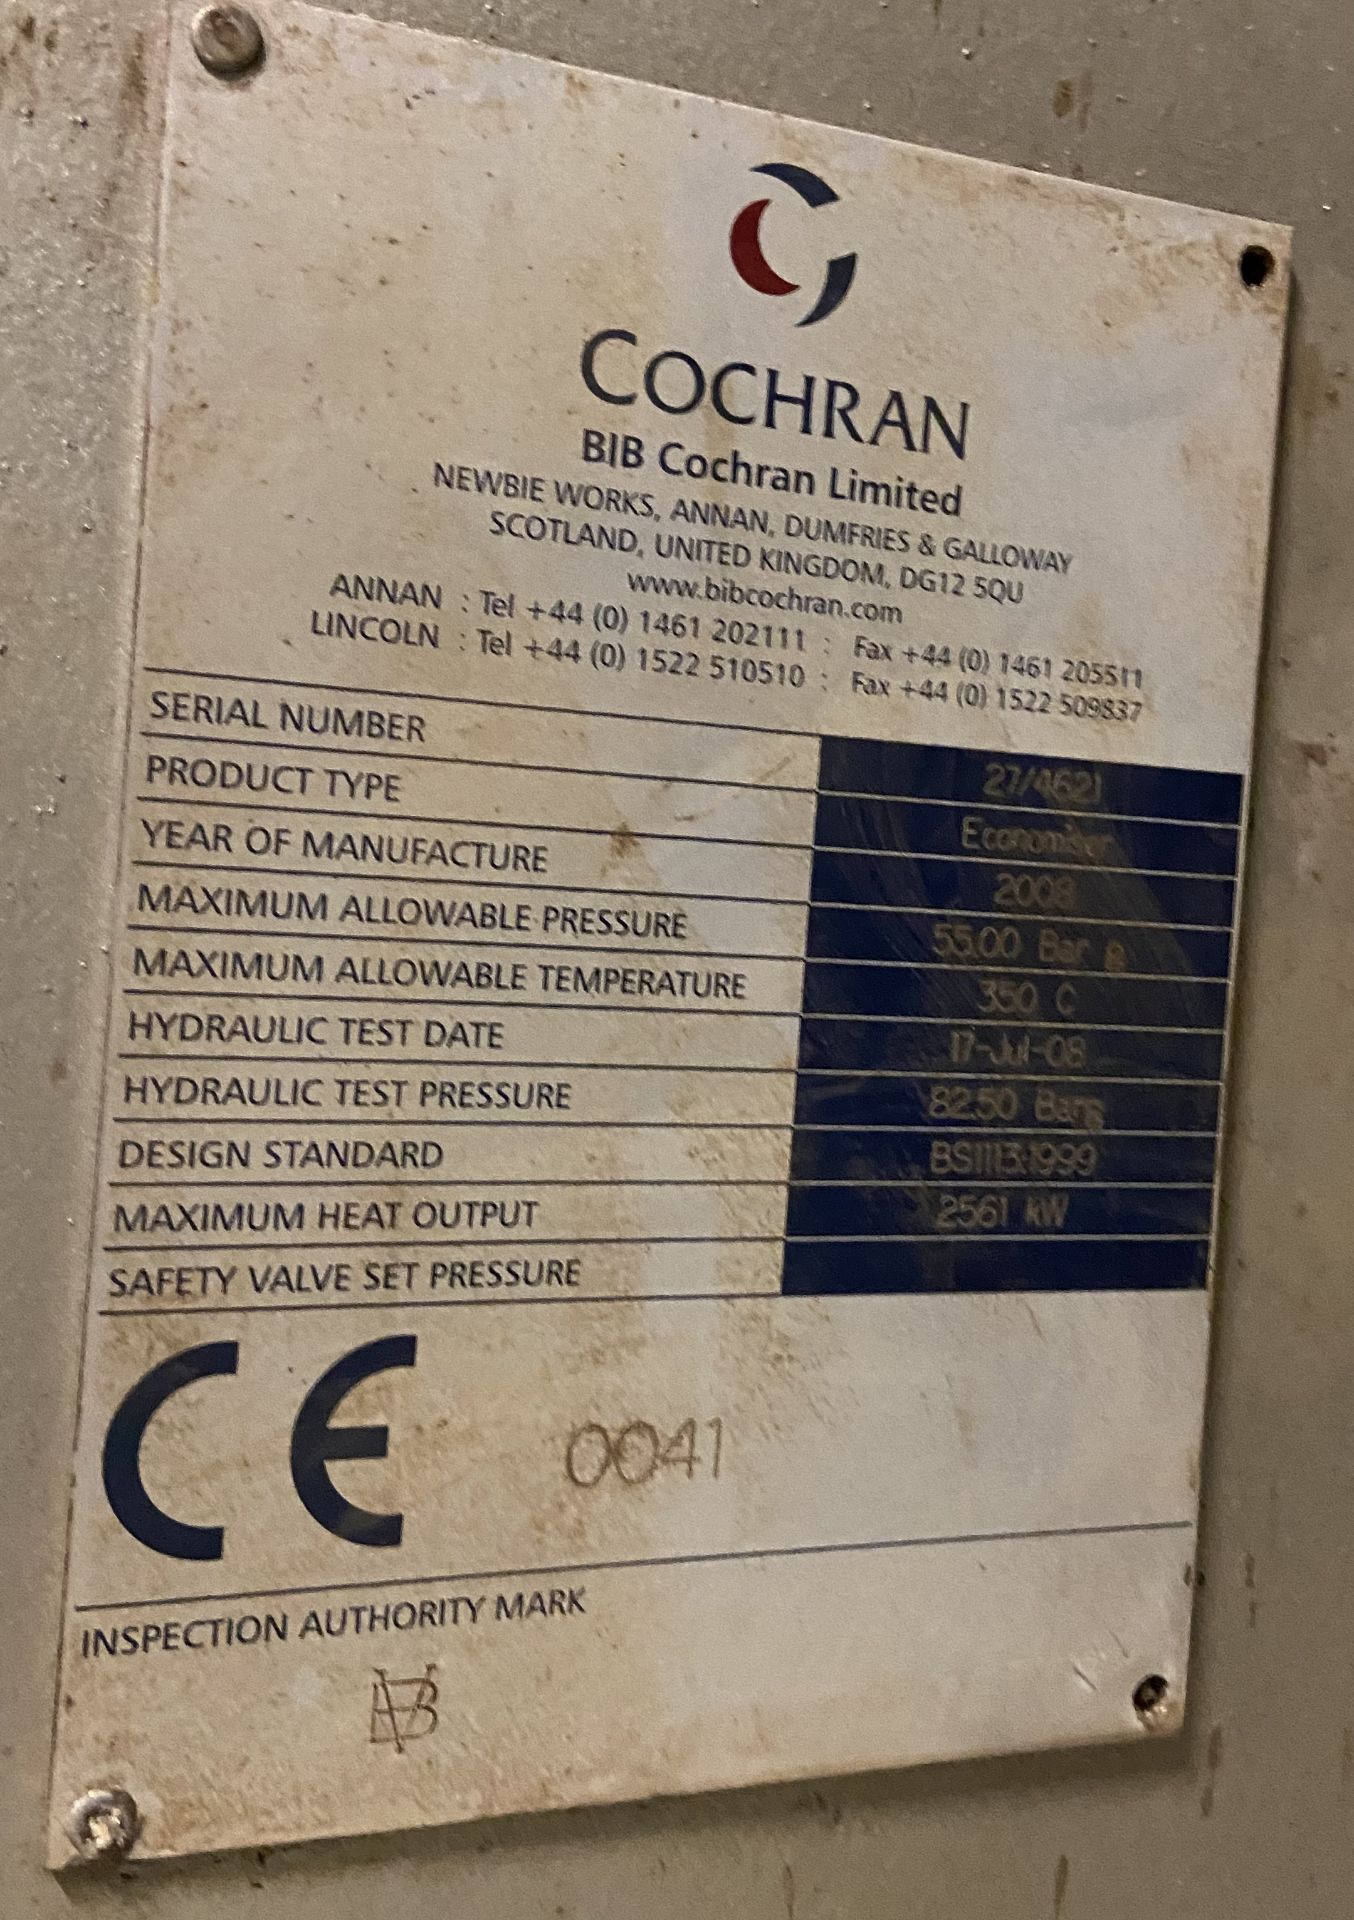 BIB Cochran WASTE HEAT UNIT, serial no. 99/4618, 15149kW max. heat output, year of manufacture 2008, - Image 10 of 10